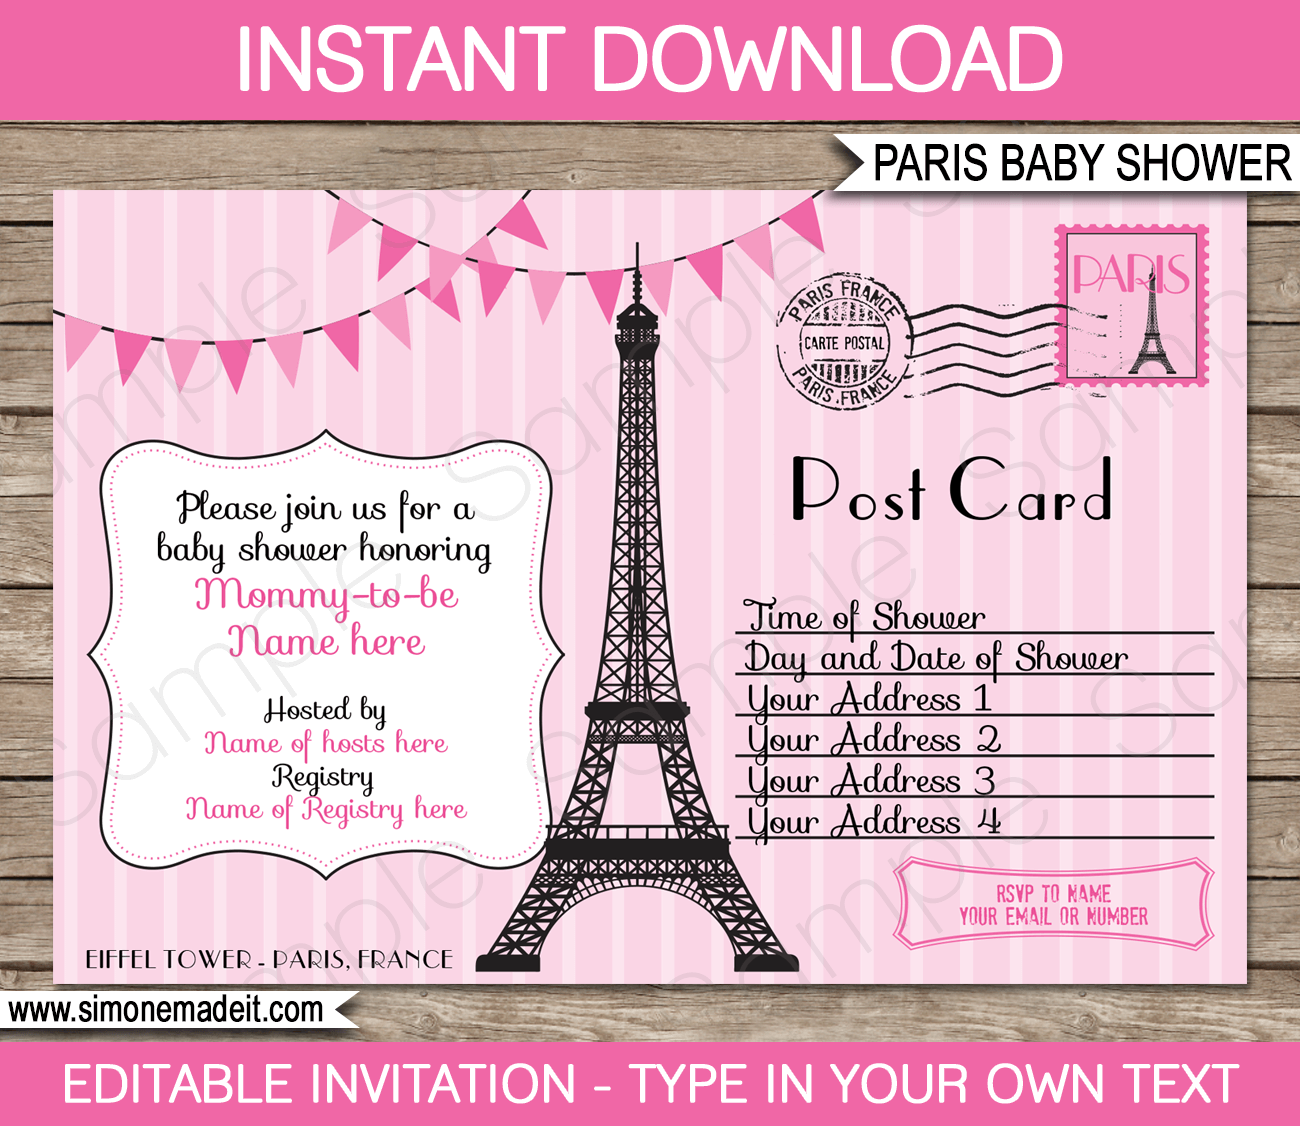 paris-baby-shower-invitations-pink-girl-template